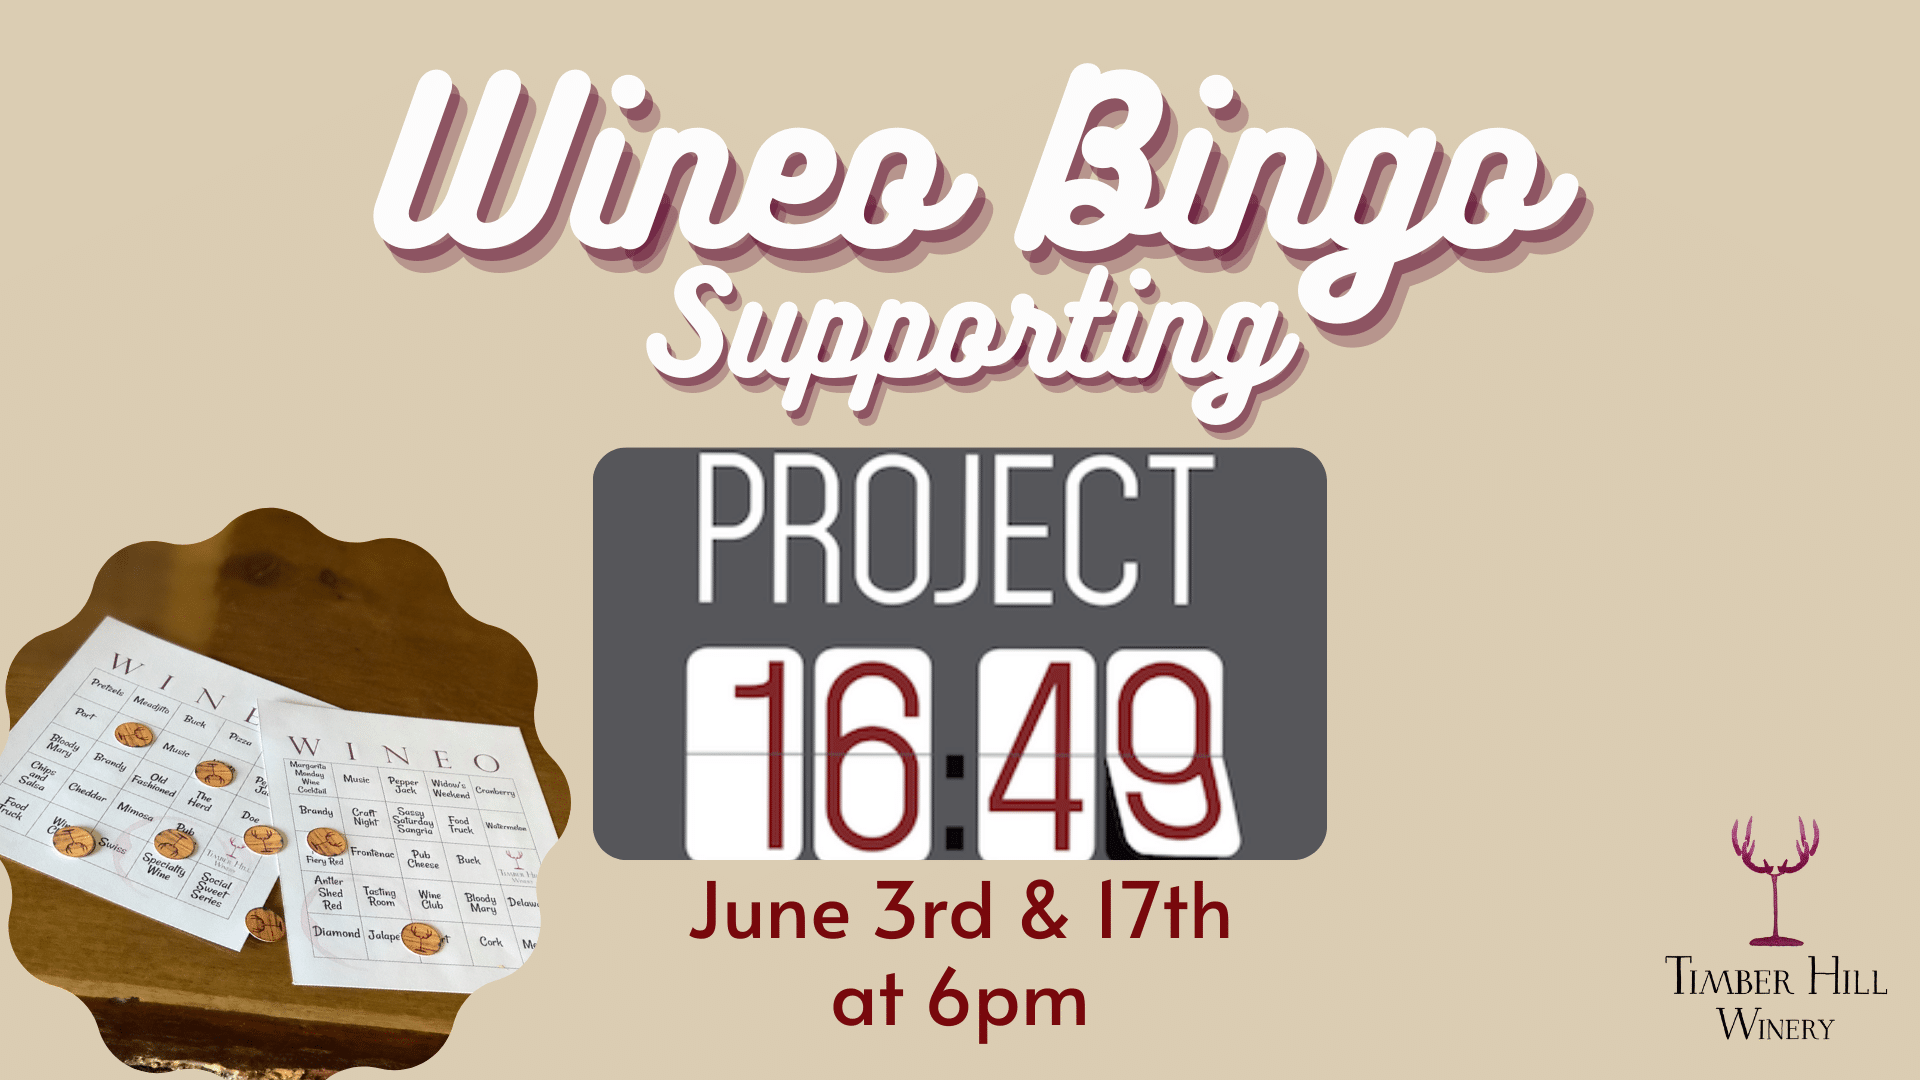 Wineo Bingo supporting project 16:49